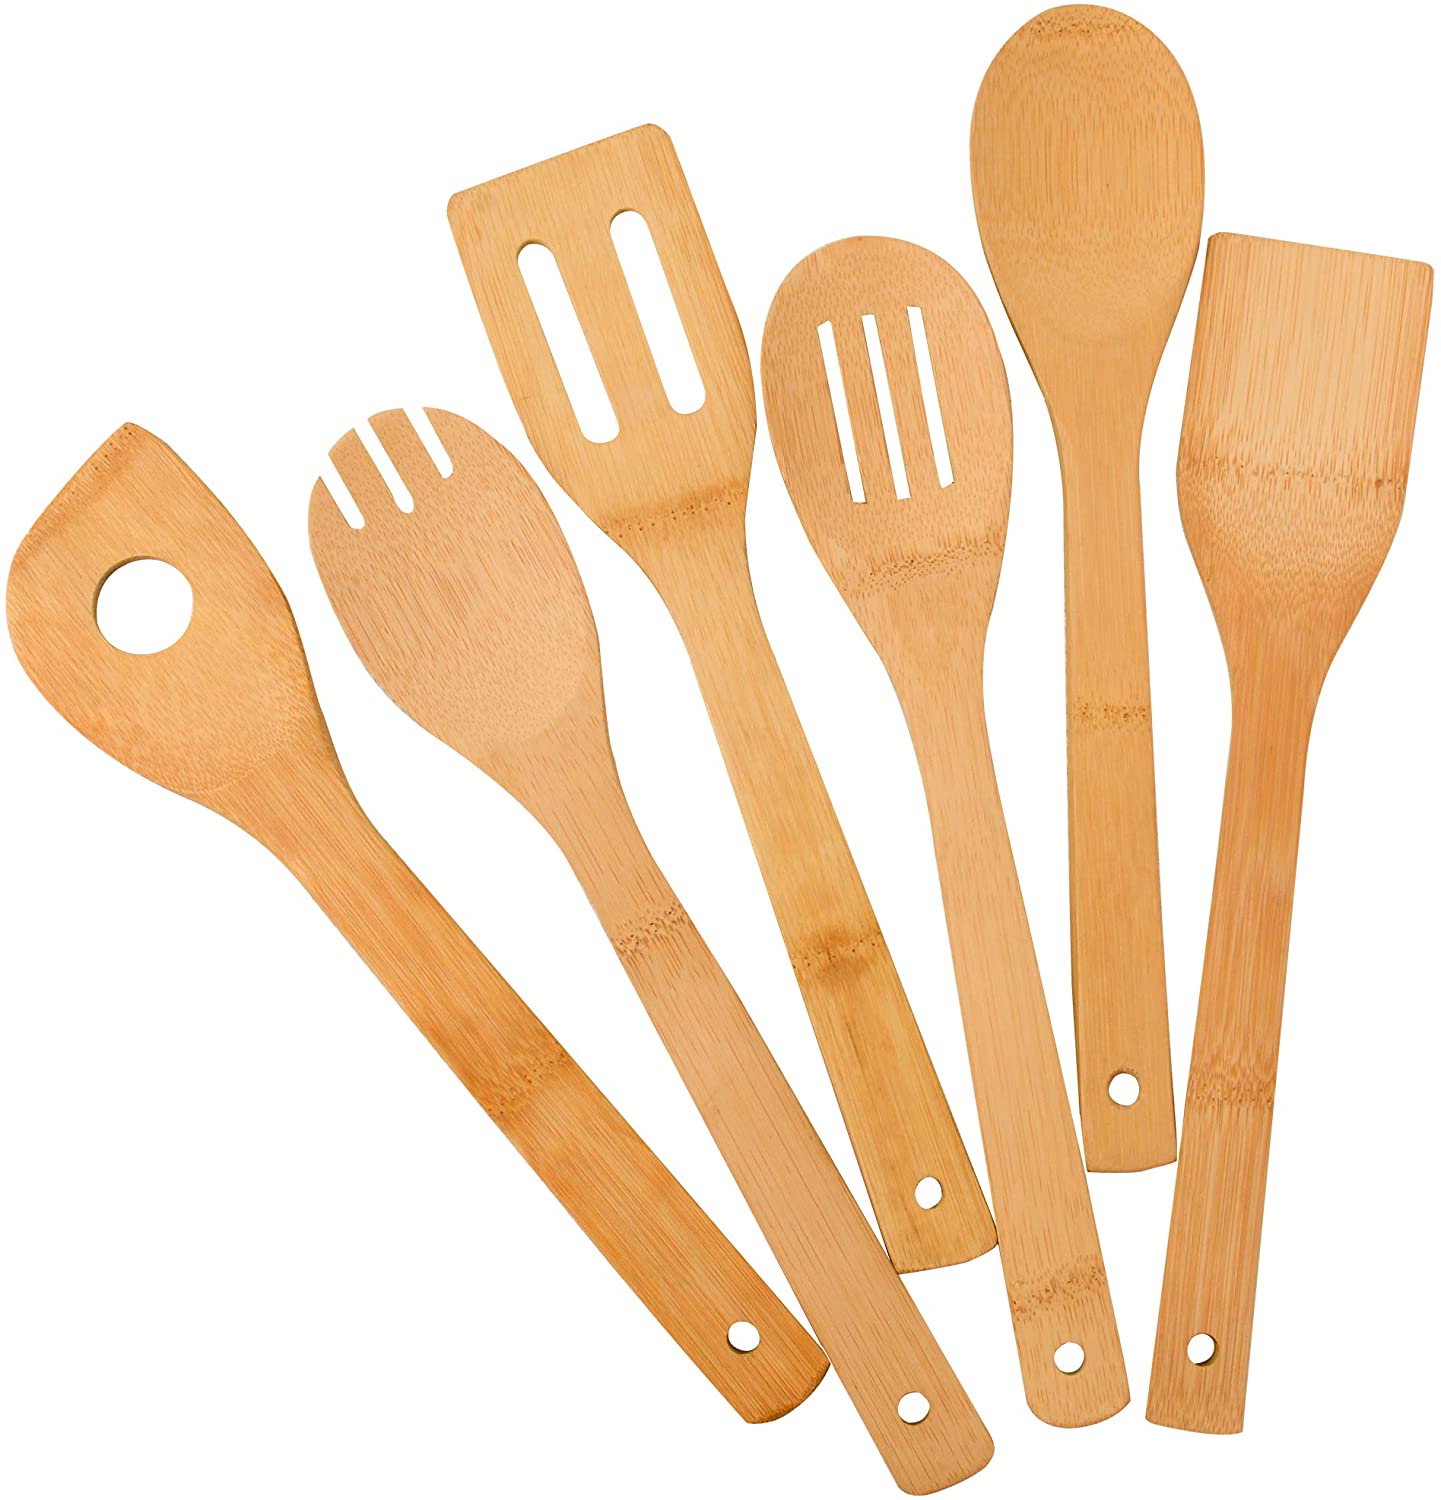 Zhuoyue Natural Wooden Spoon & Spoon Set, 6-Piece